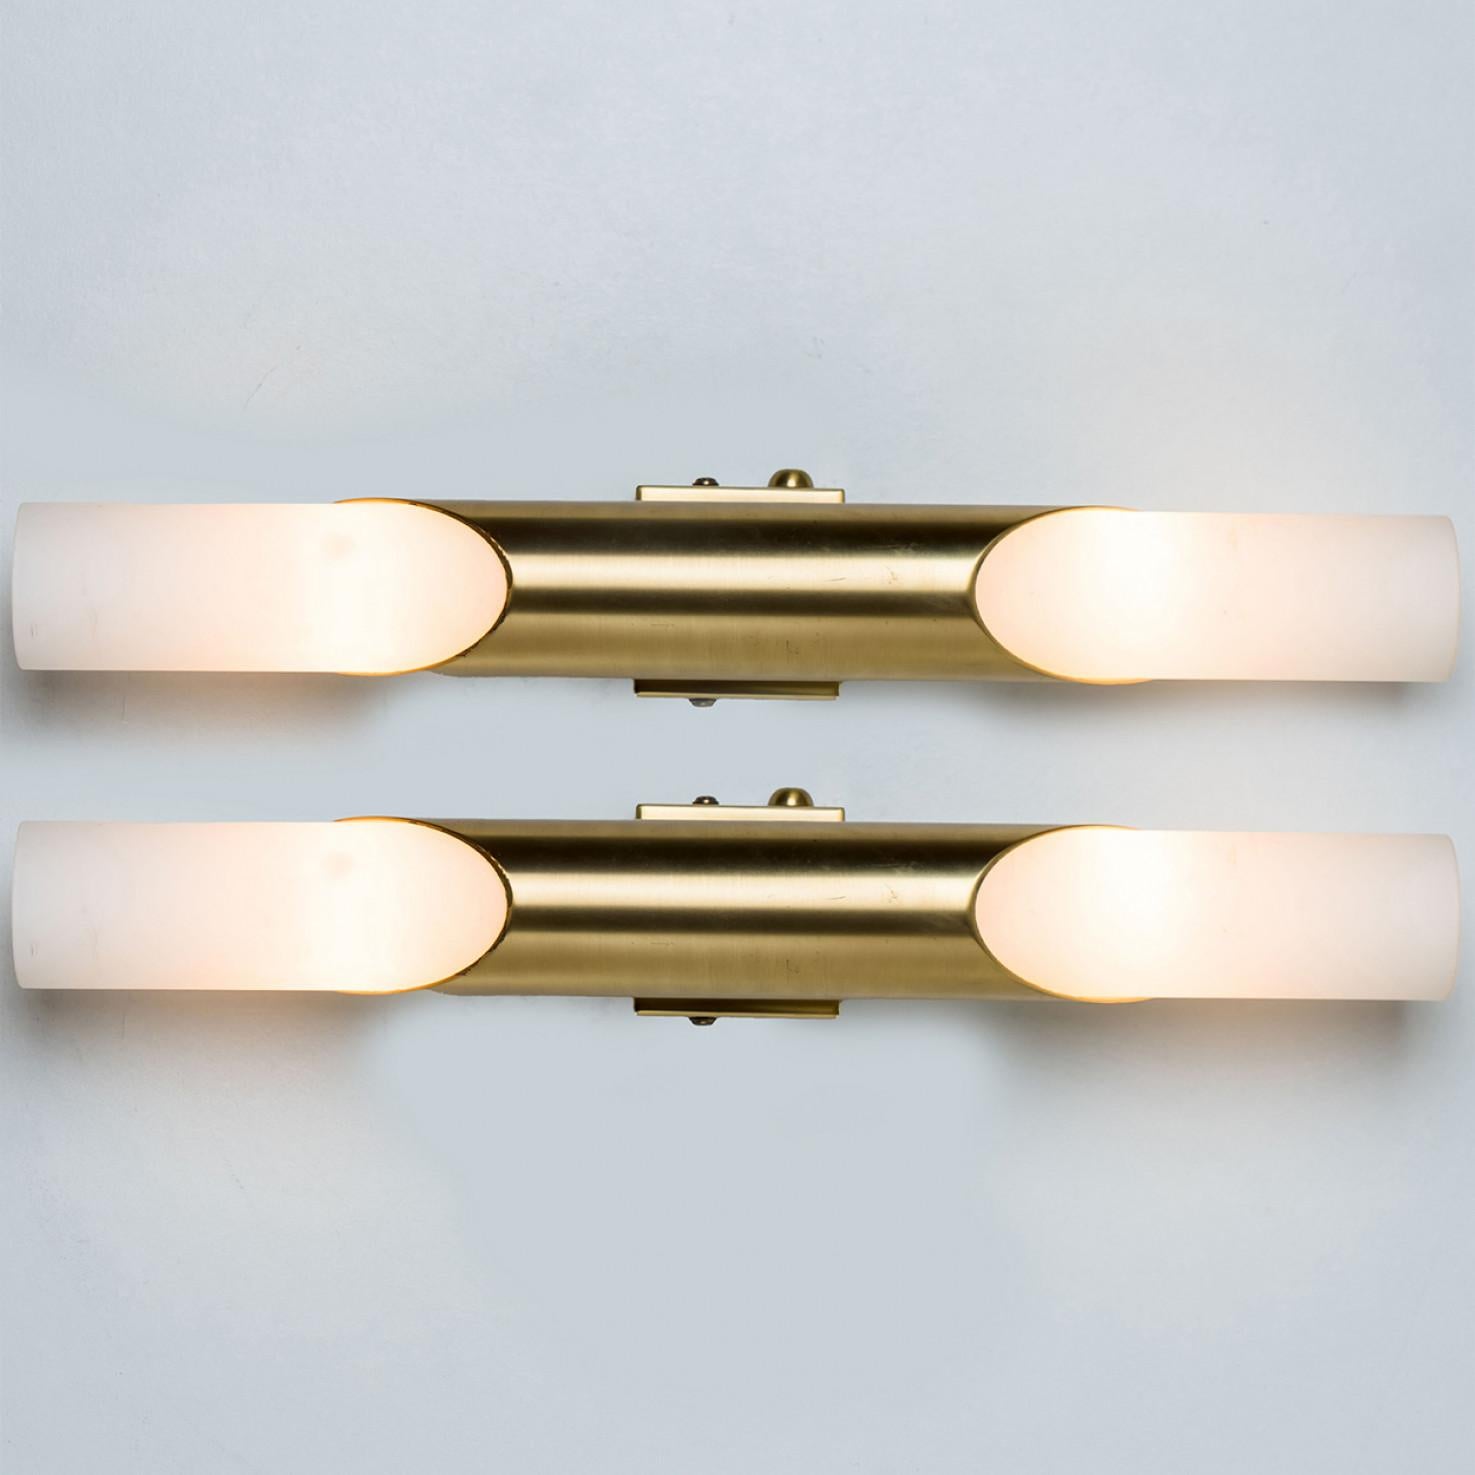 A Pair of Tube Milkglass Brass Wall Sconces, Germany, 1970s For Sale 8